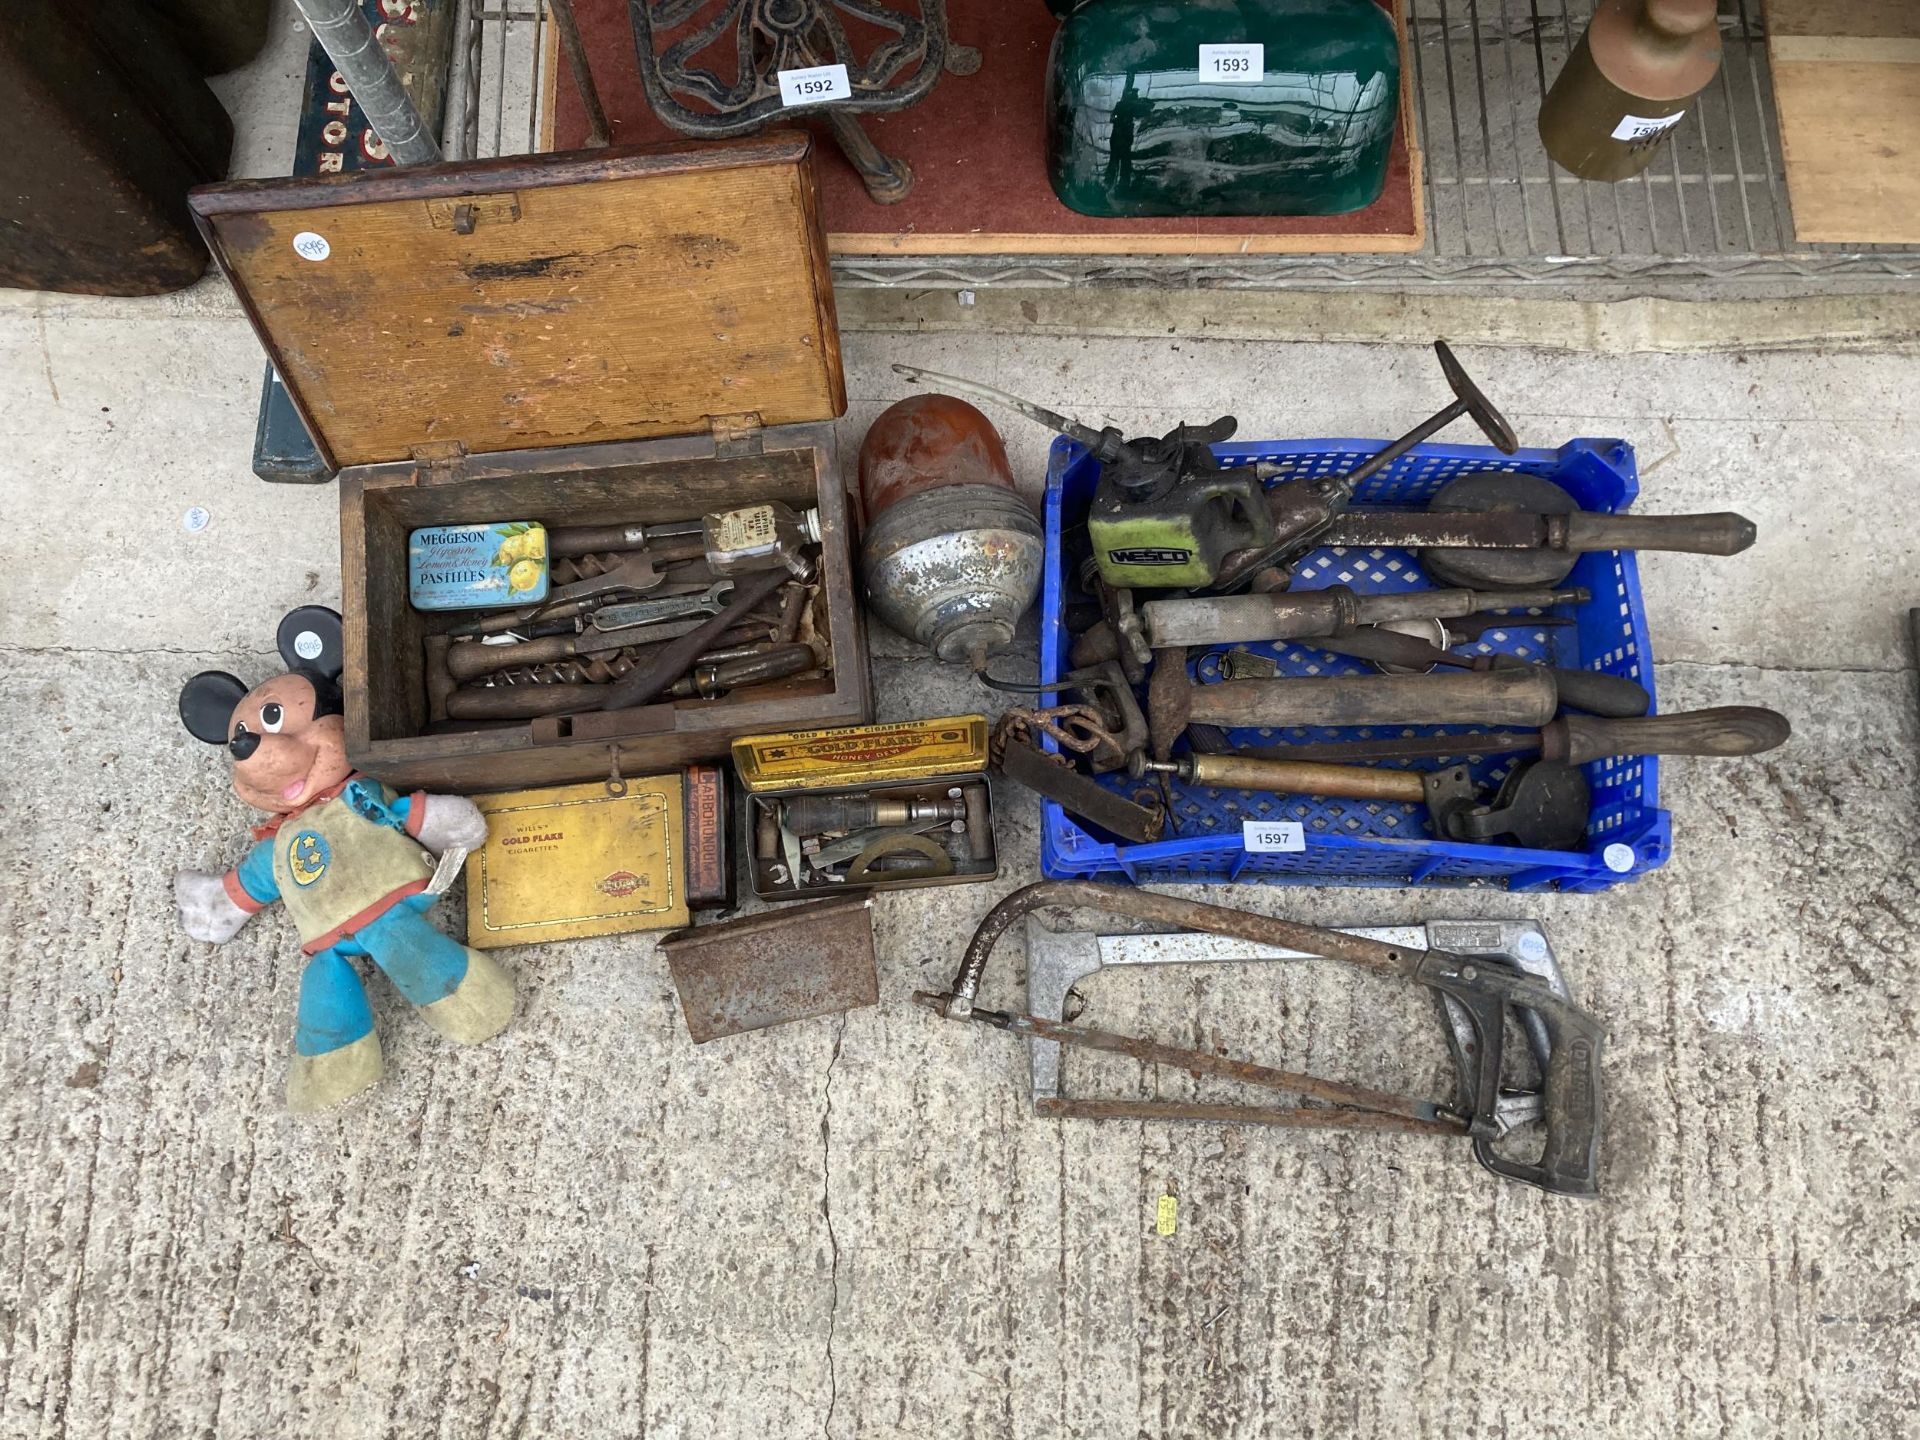 AN ASSORTMENT OF VINTAGE TOOLS TO INCLUDE FILES, RASPS, SPANNERS AND SAWS ETC